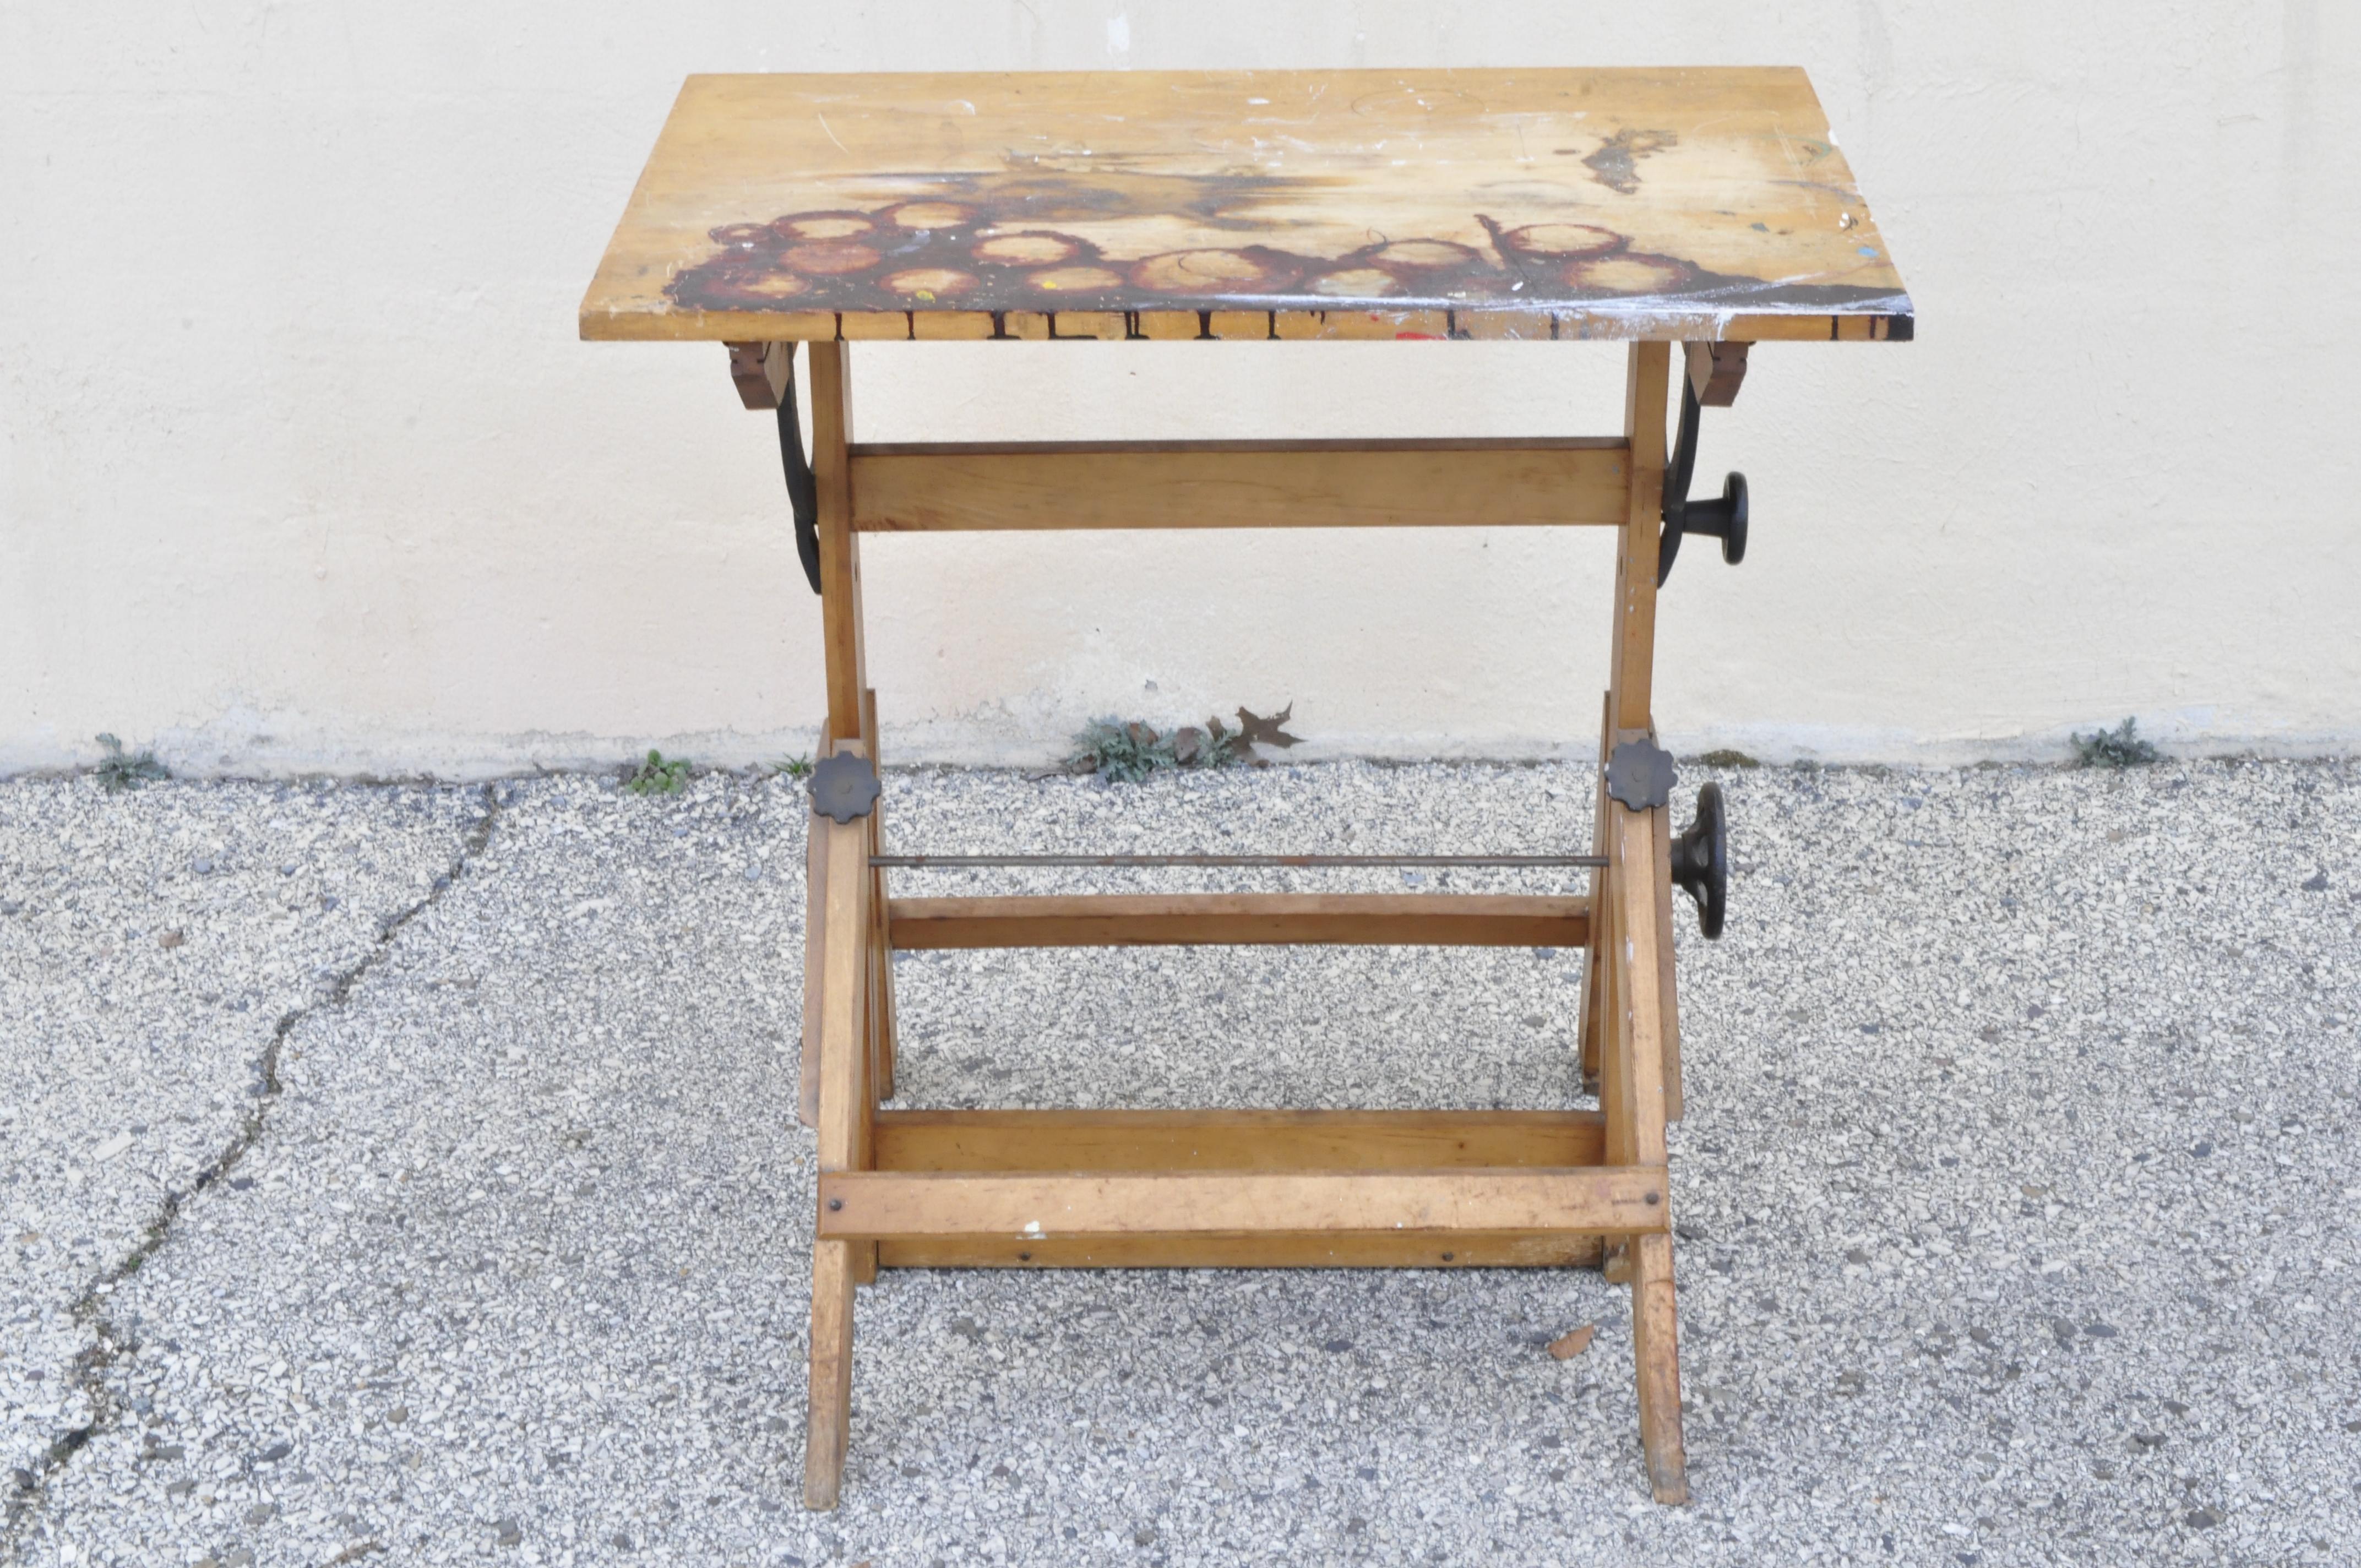 Antique American Industrial Small Drafting Table Work Desk Cast Iron Solid Wood In Good Condition For Sale In Philadelphia, PA